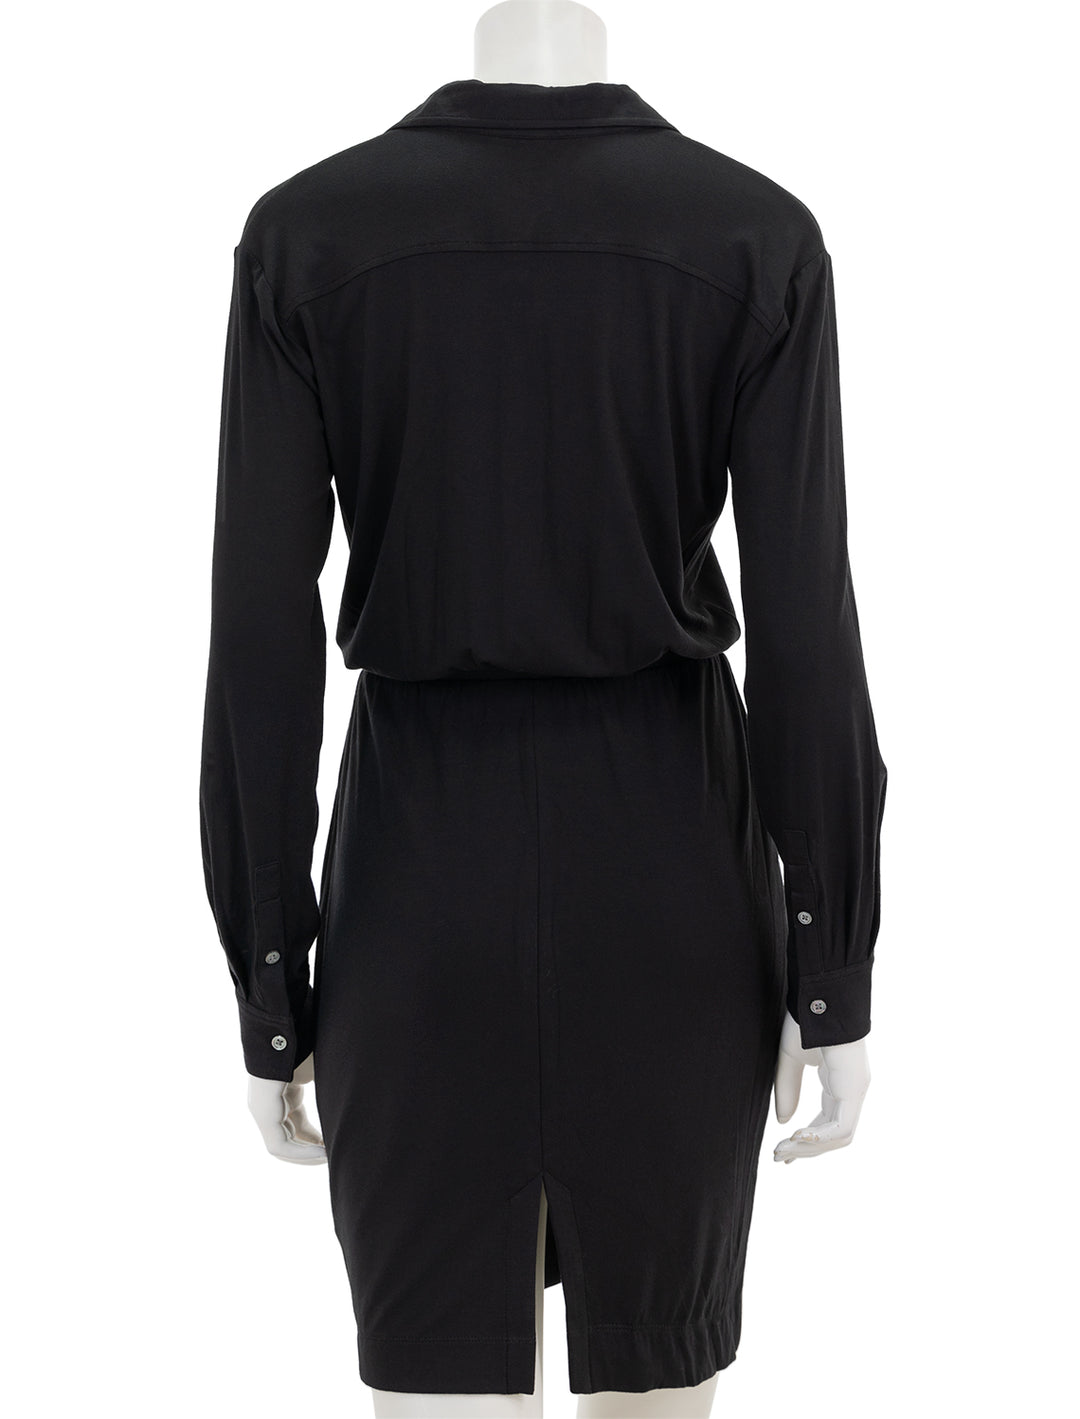 Back view of ATM's matte jersey long sleeve shirt dress in black.